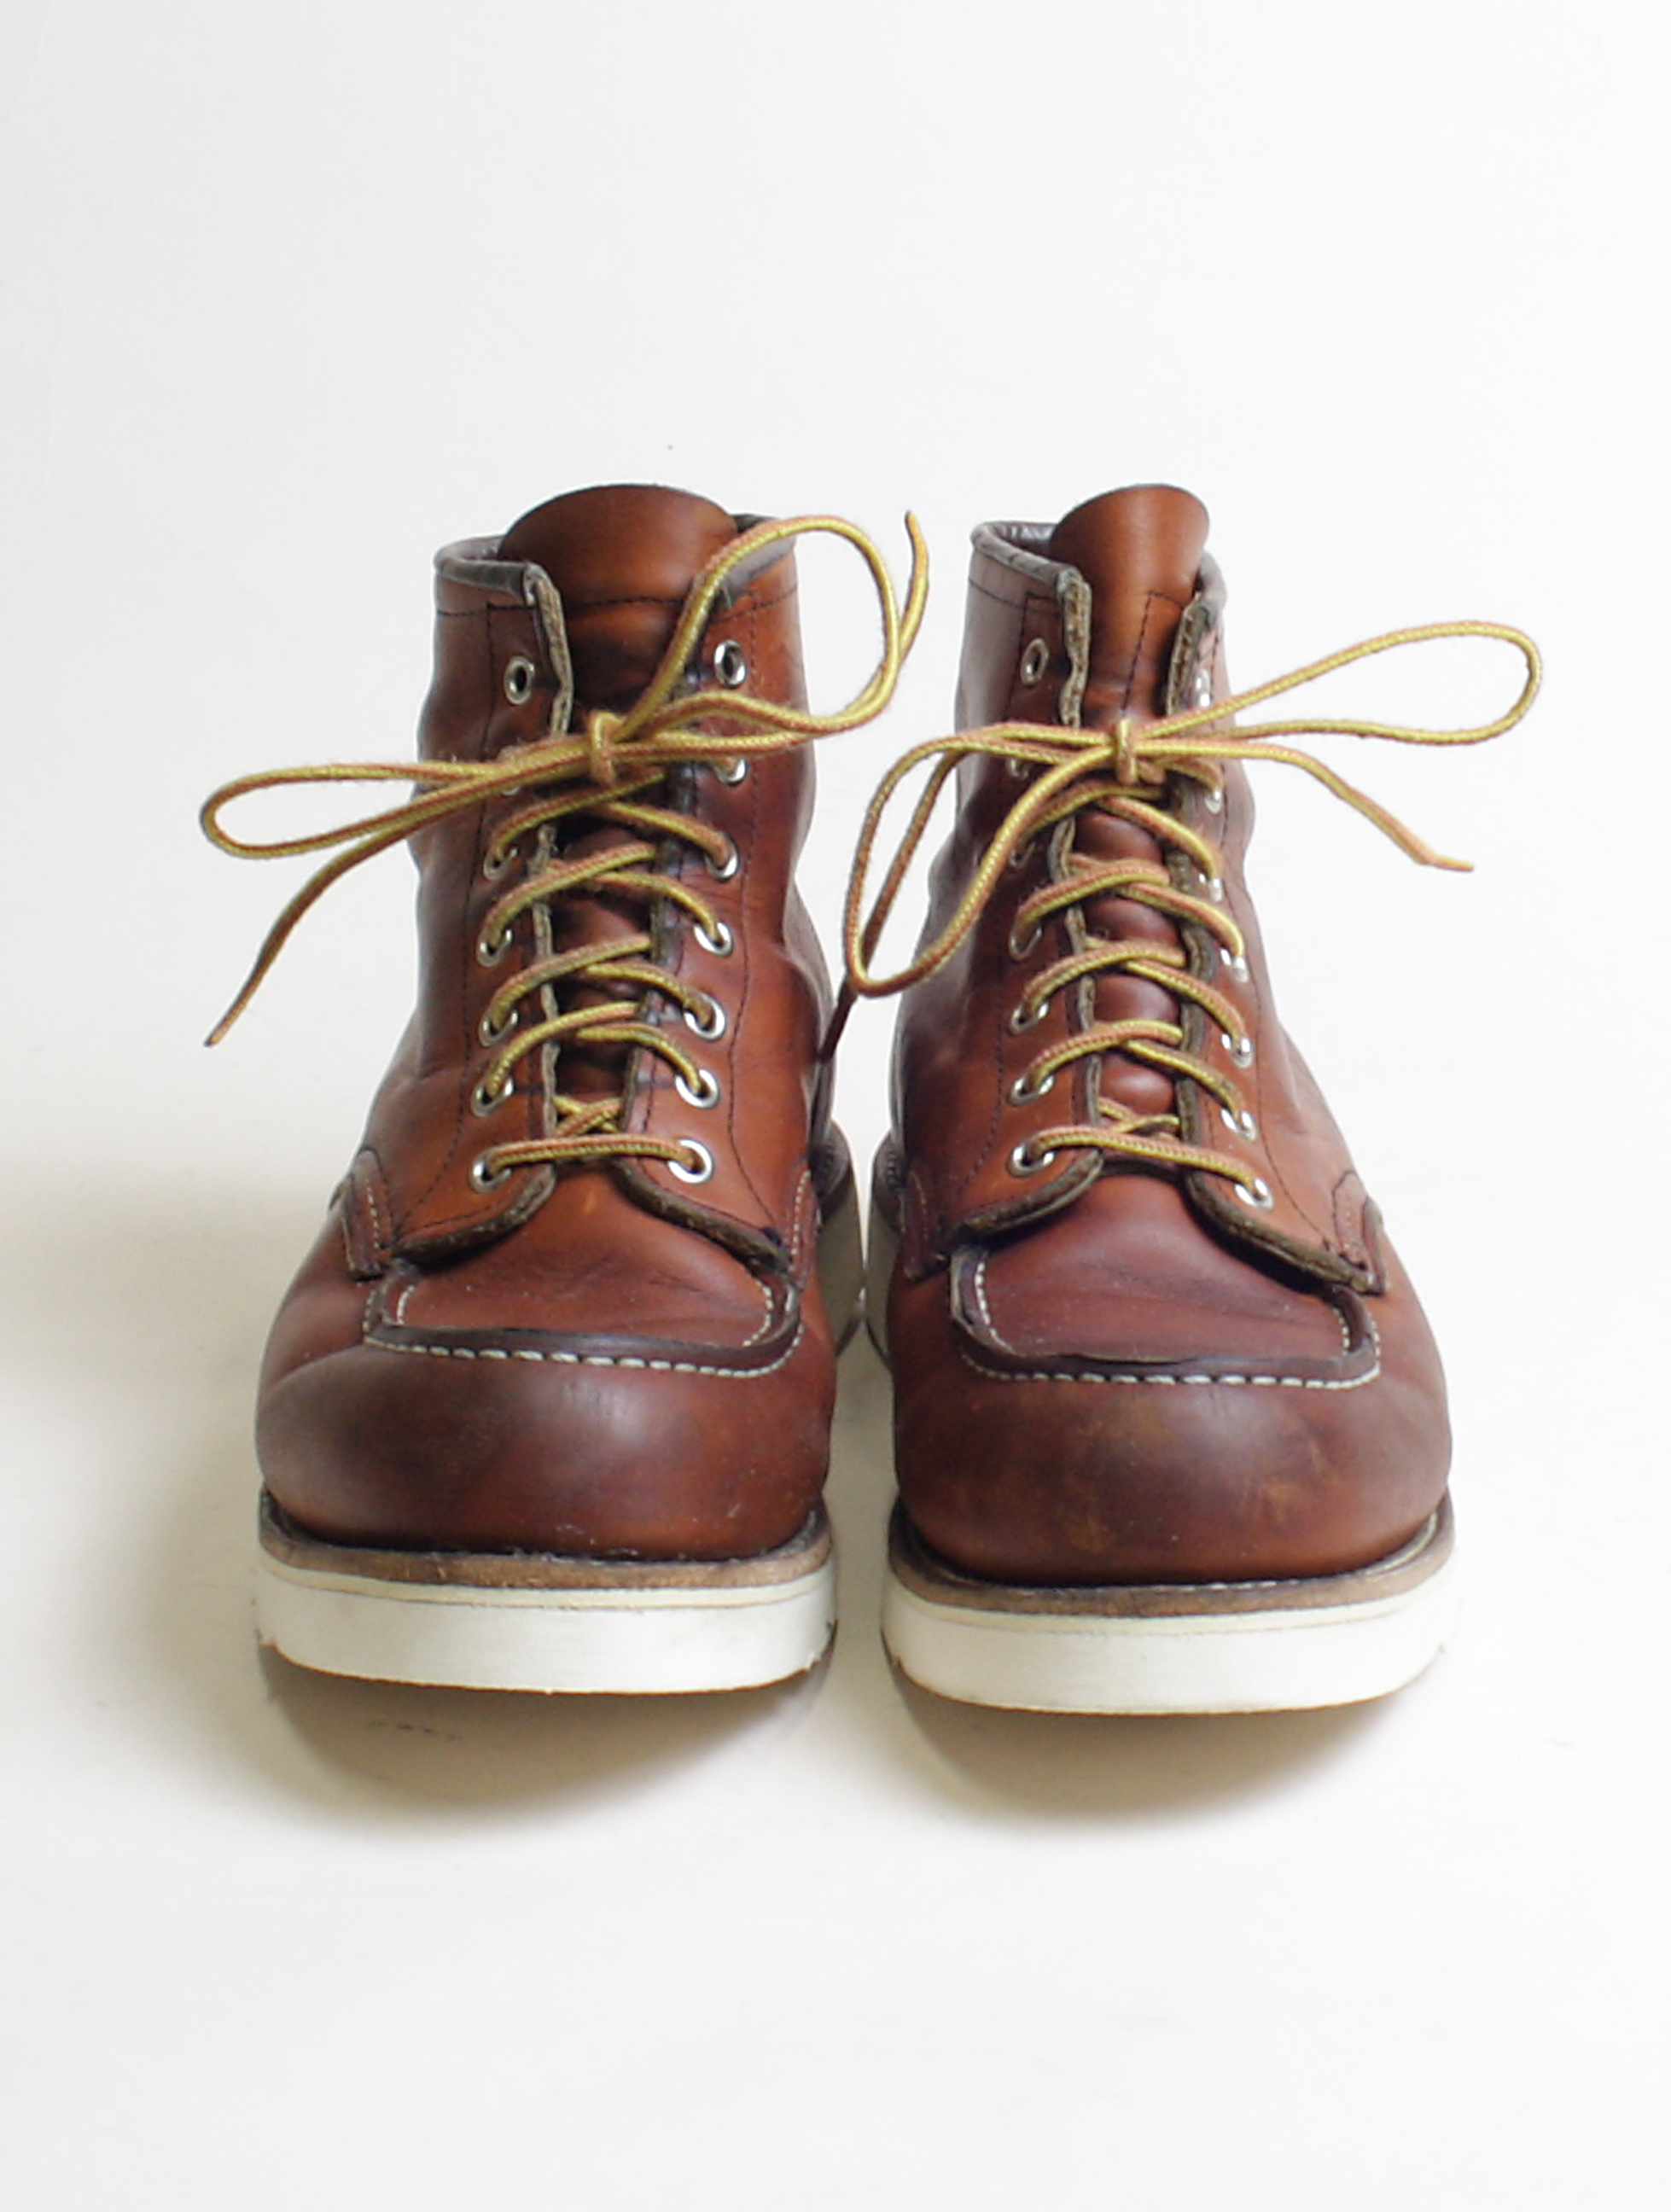 Repair – Redwing resoled with Vibram® Morflex front detail